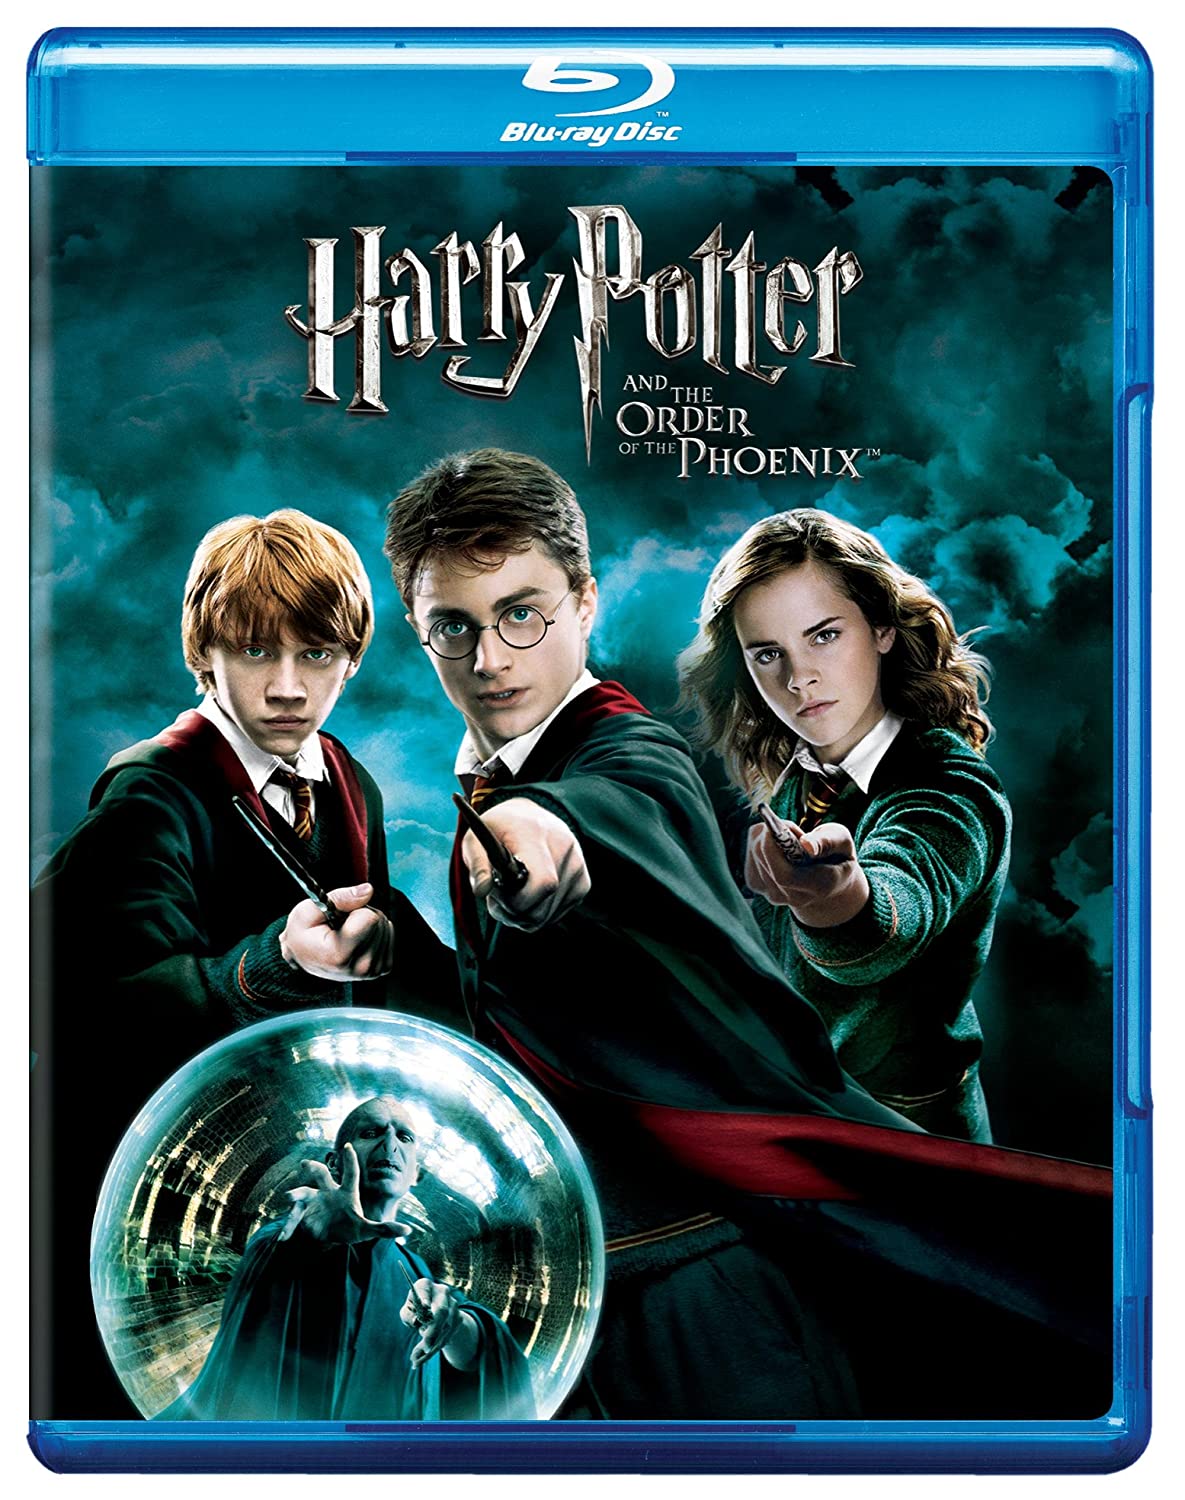 Harry Potter and the Order of the Phoenix - Blu-ray (Used Once)